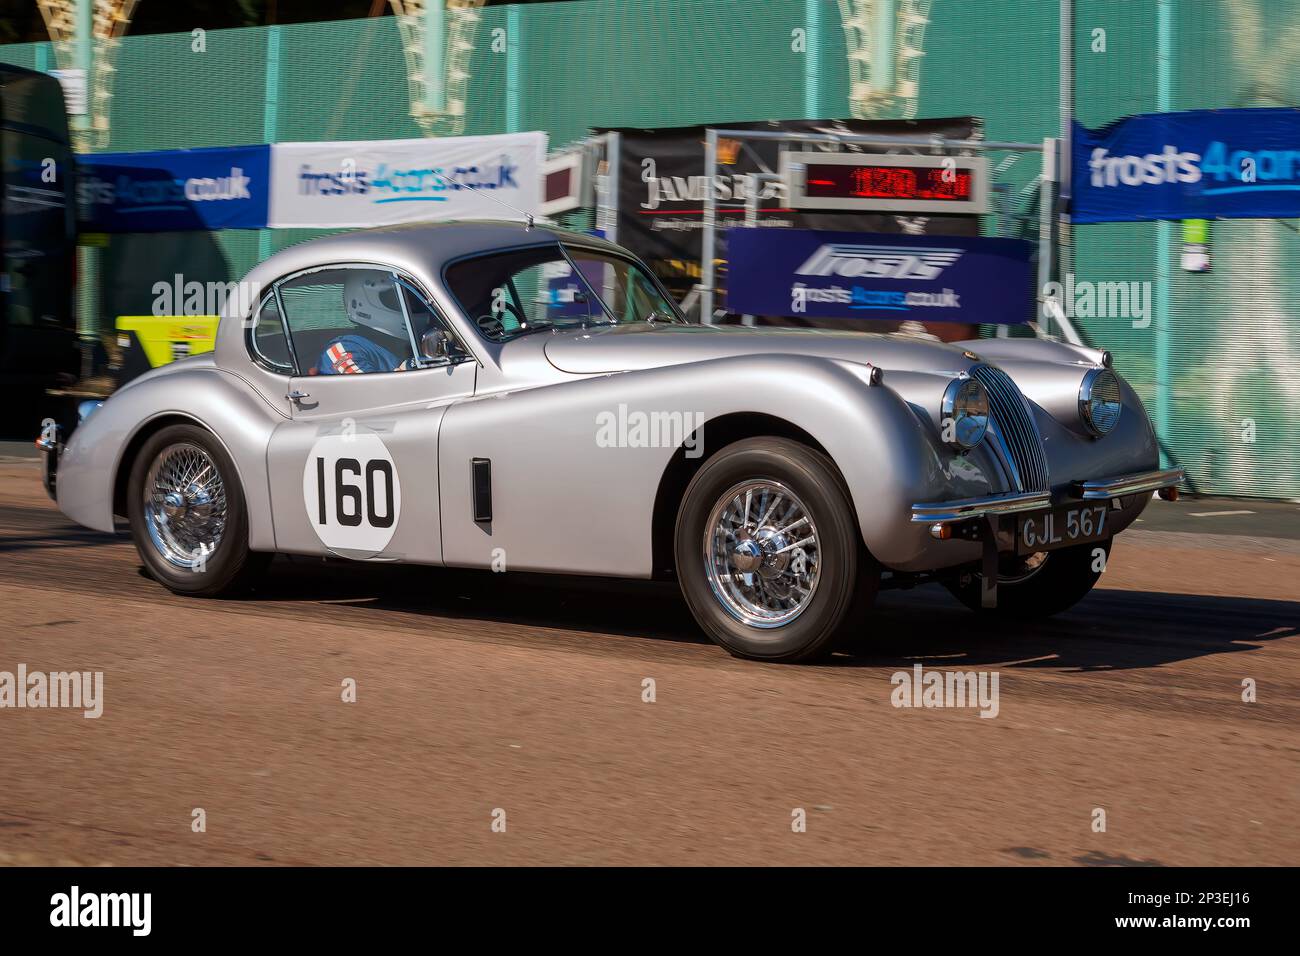 Brian Tyrer driving a Jaguar XK120 1954 at The Brighton National Speed Trials 2018. This is the oldest motor racing event in the UK and is held in the south east coastal town of Brighton. Madeira drive is a road which runs along the seafront and is normal full of people explorer the beach, pier and local attractions. Today it is turned in to a 1/4 time trial course. 1st September 2018 Stock Photo